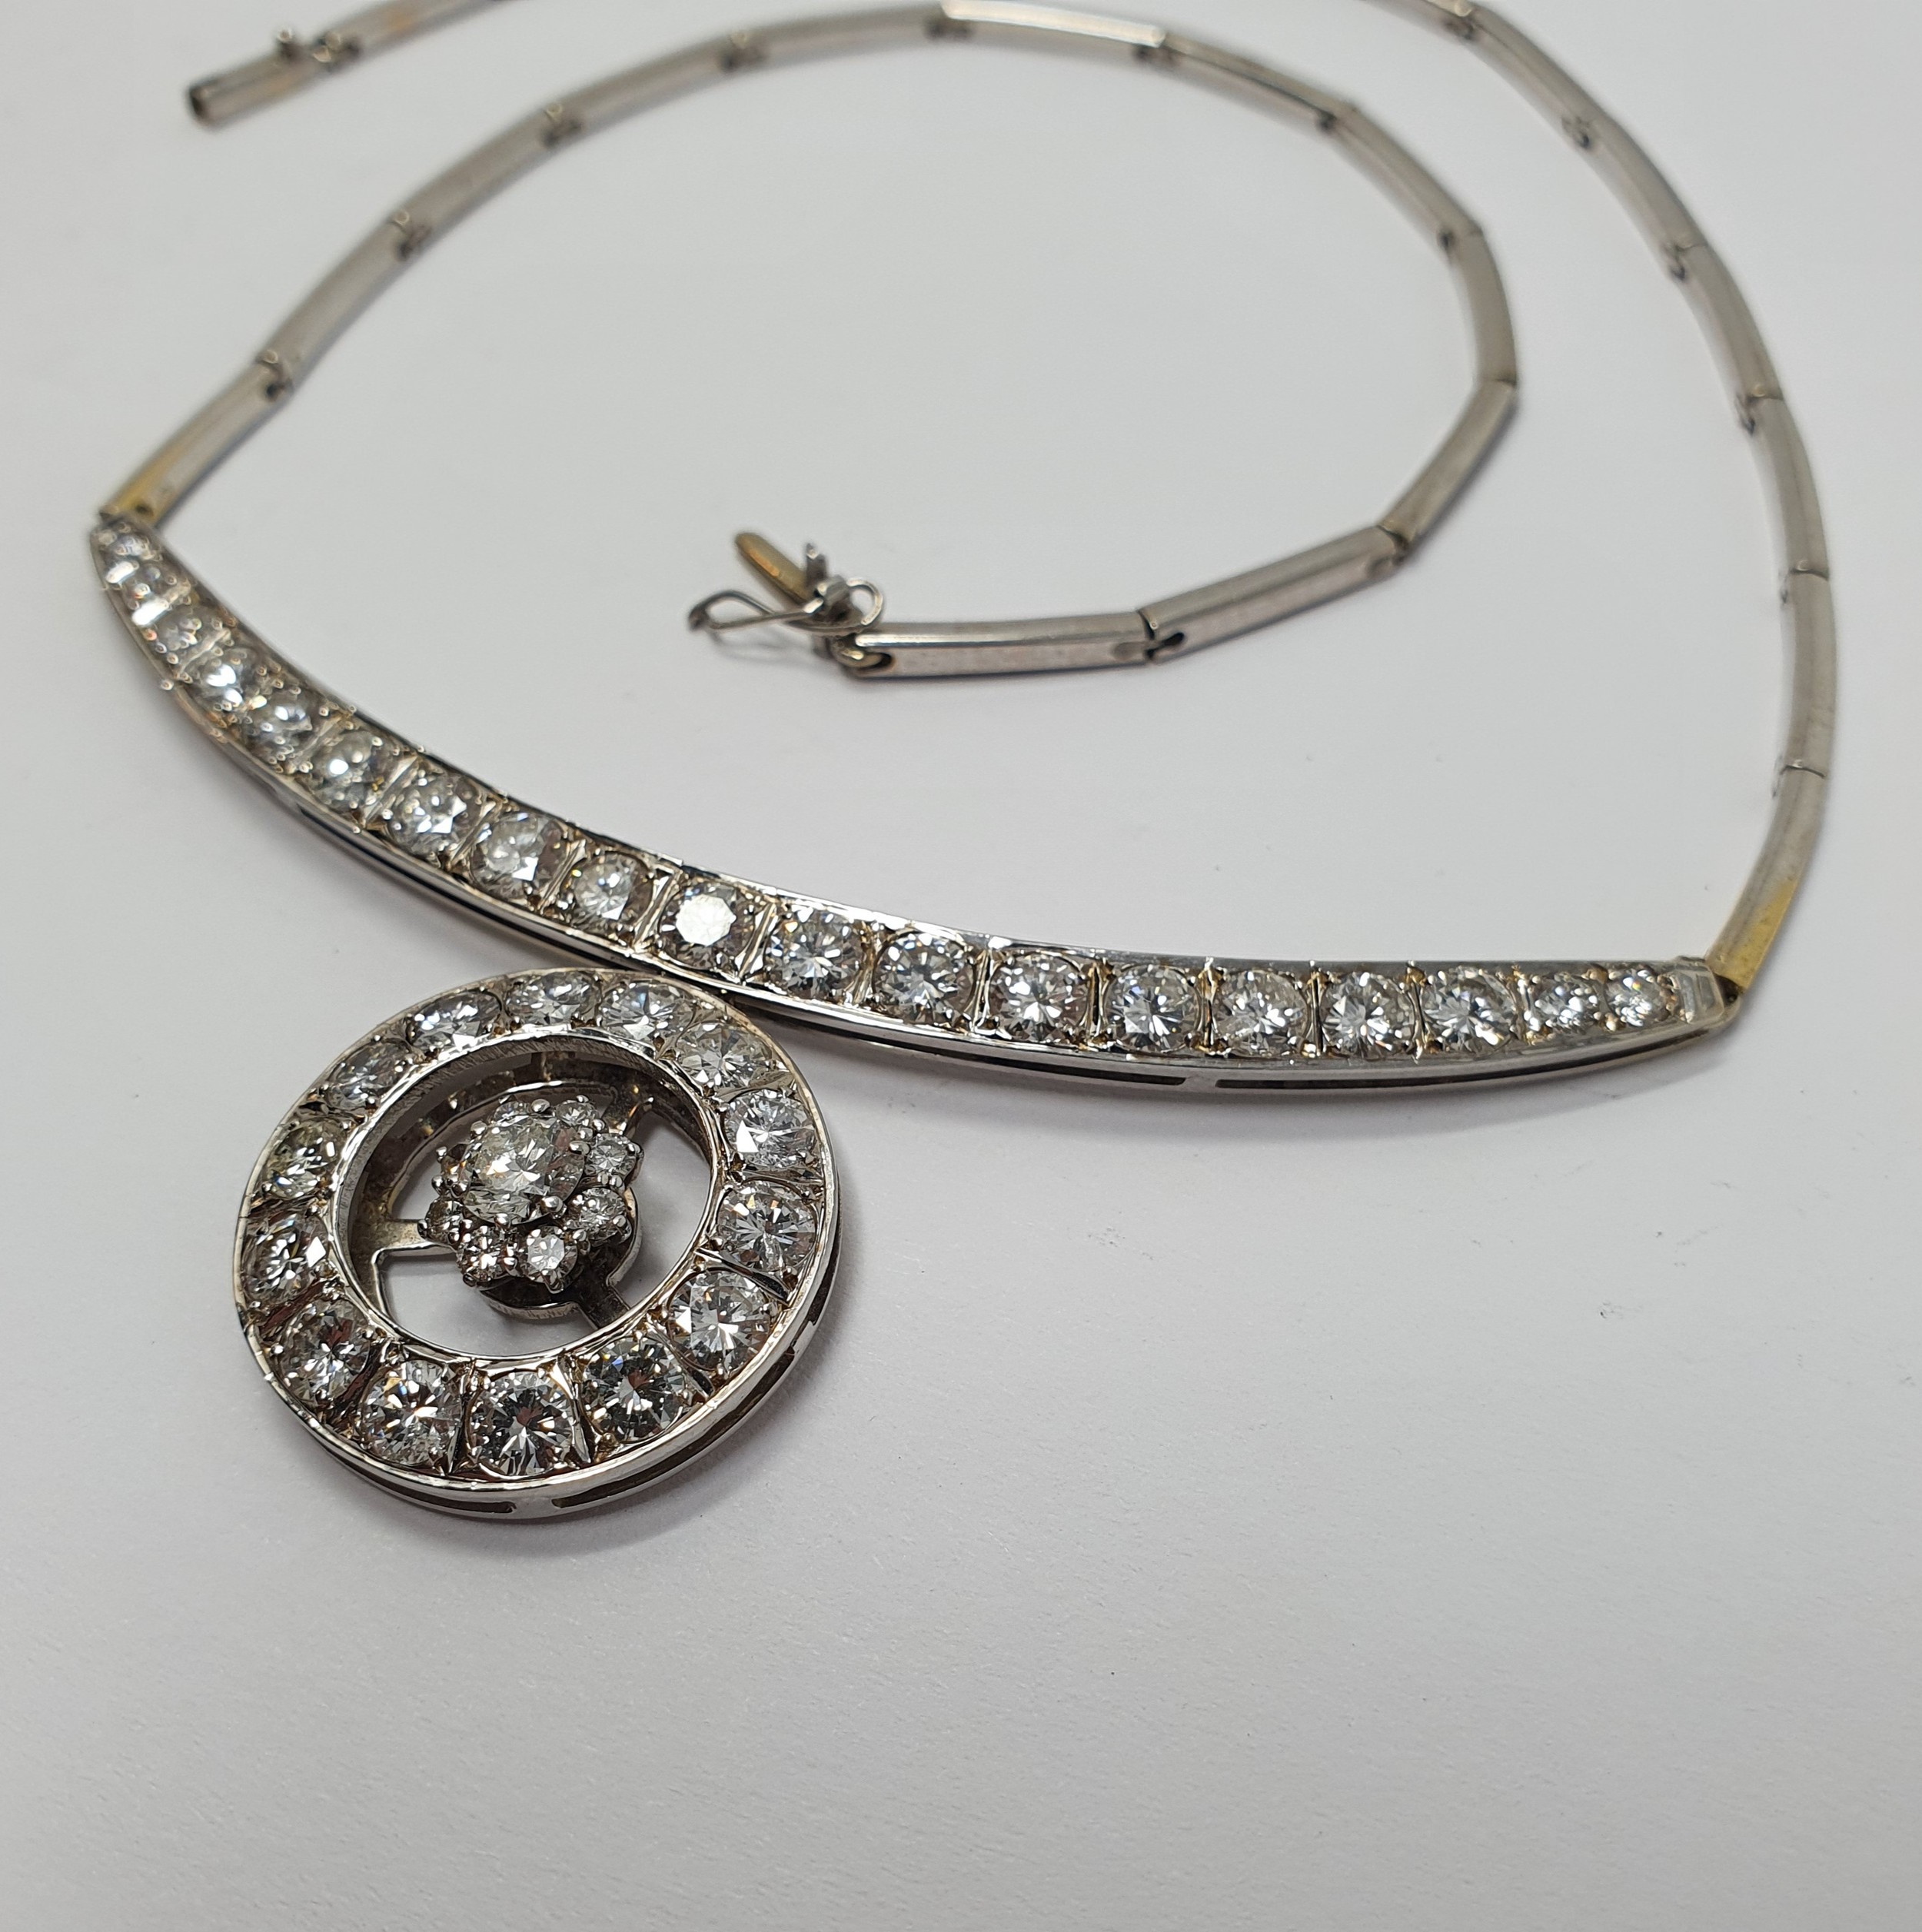 A substantial 18ct white gold and diamond necklace, with a diamond drop Total weight 10ct approx. - Image 2 of 4